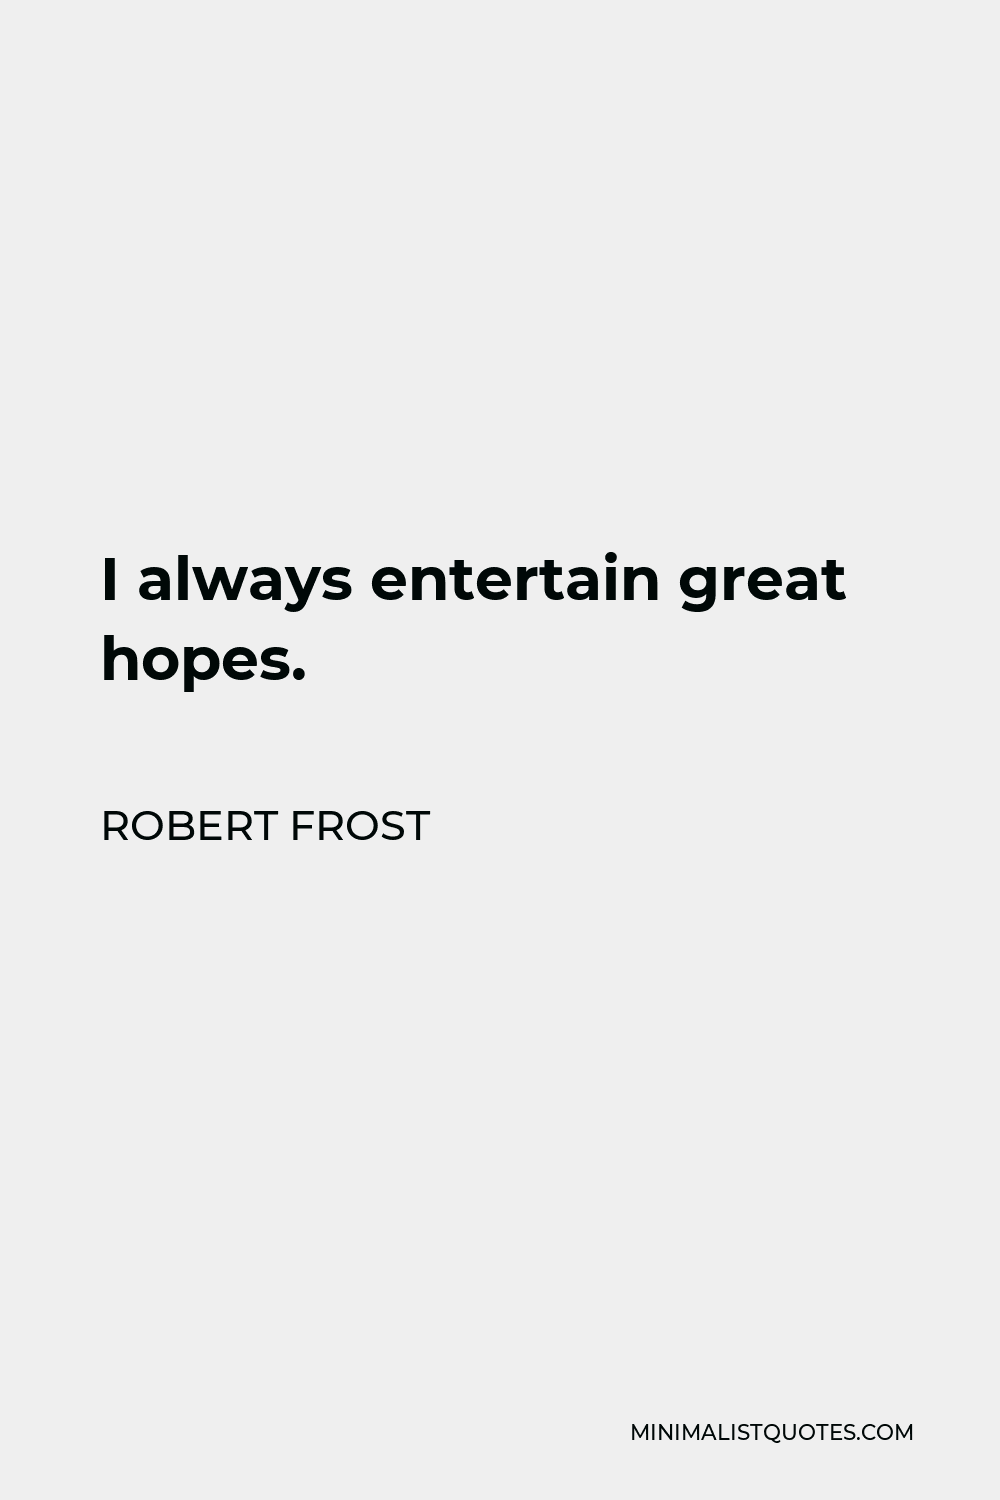 Robert Frost Quote - I always entertain great hopes.